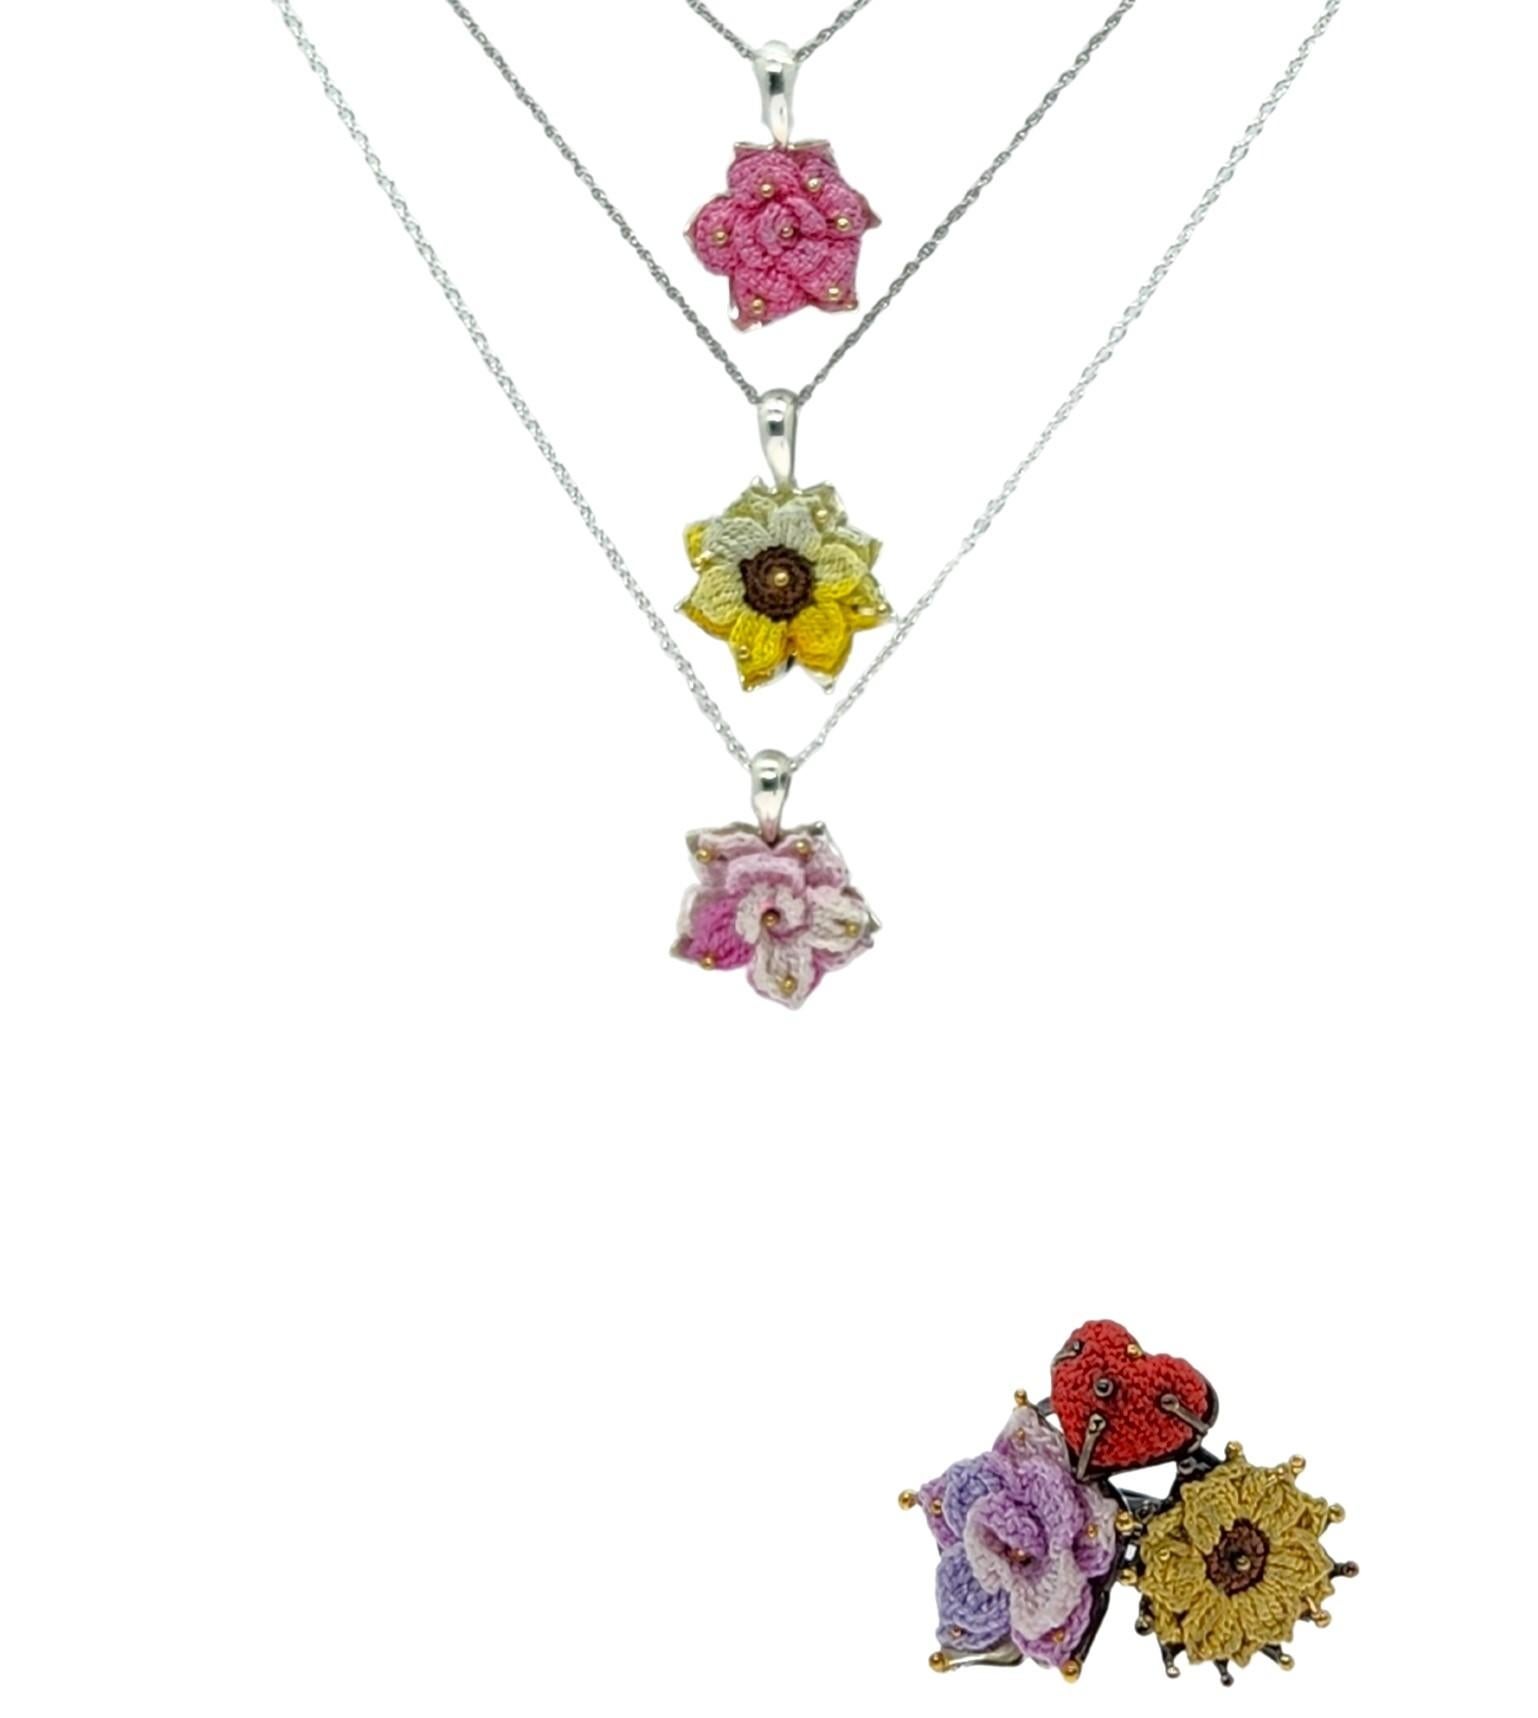 Women's Hand Knit Flower Necklace in Handmade Sterling Silver and 14KY Setting #3 For Sale